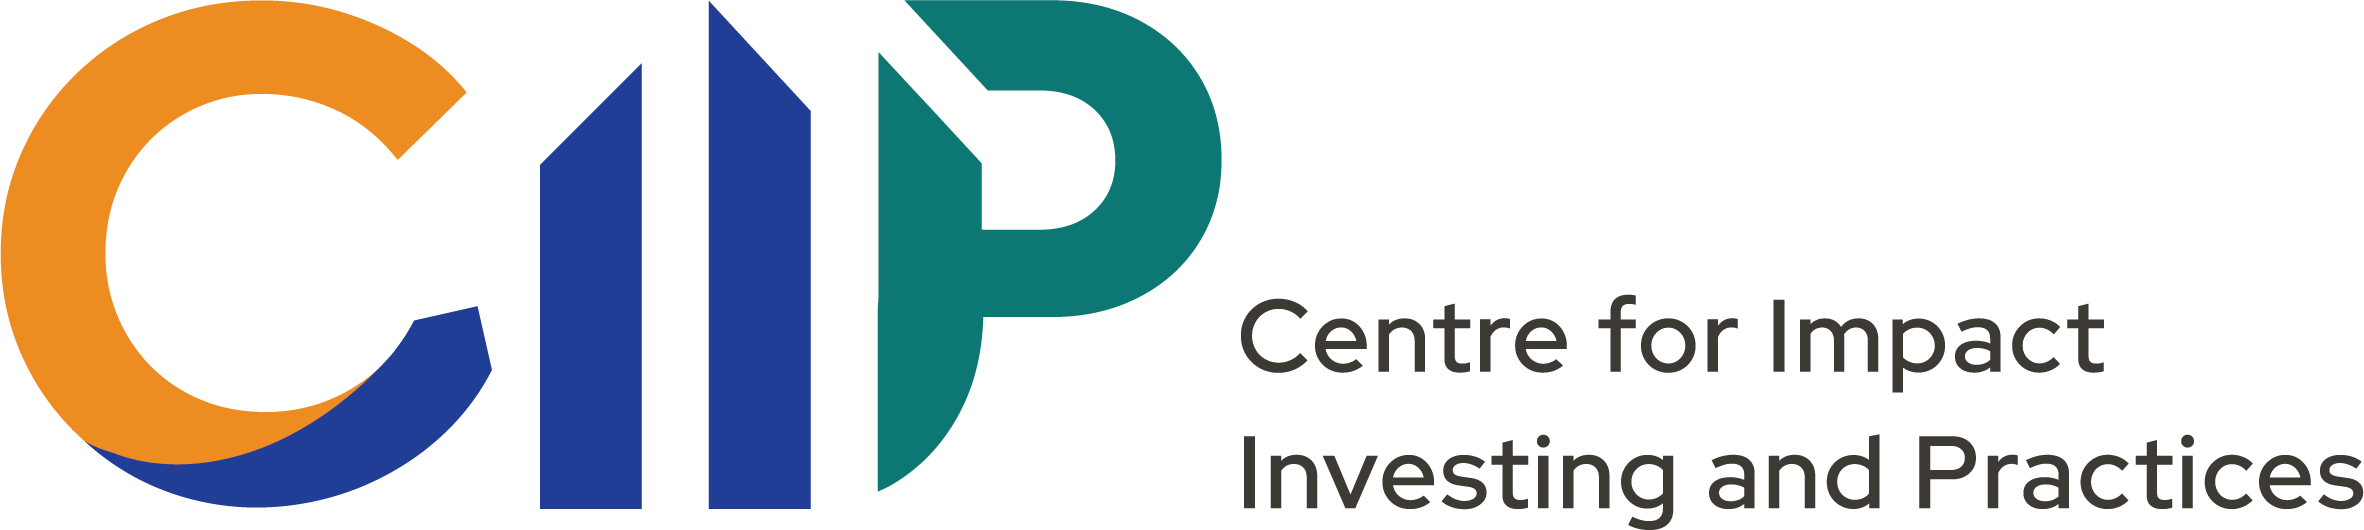 Centre for Impact Investing and Practices (CIIP)